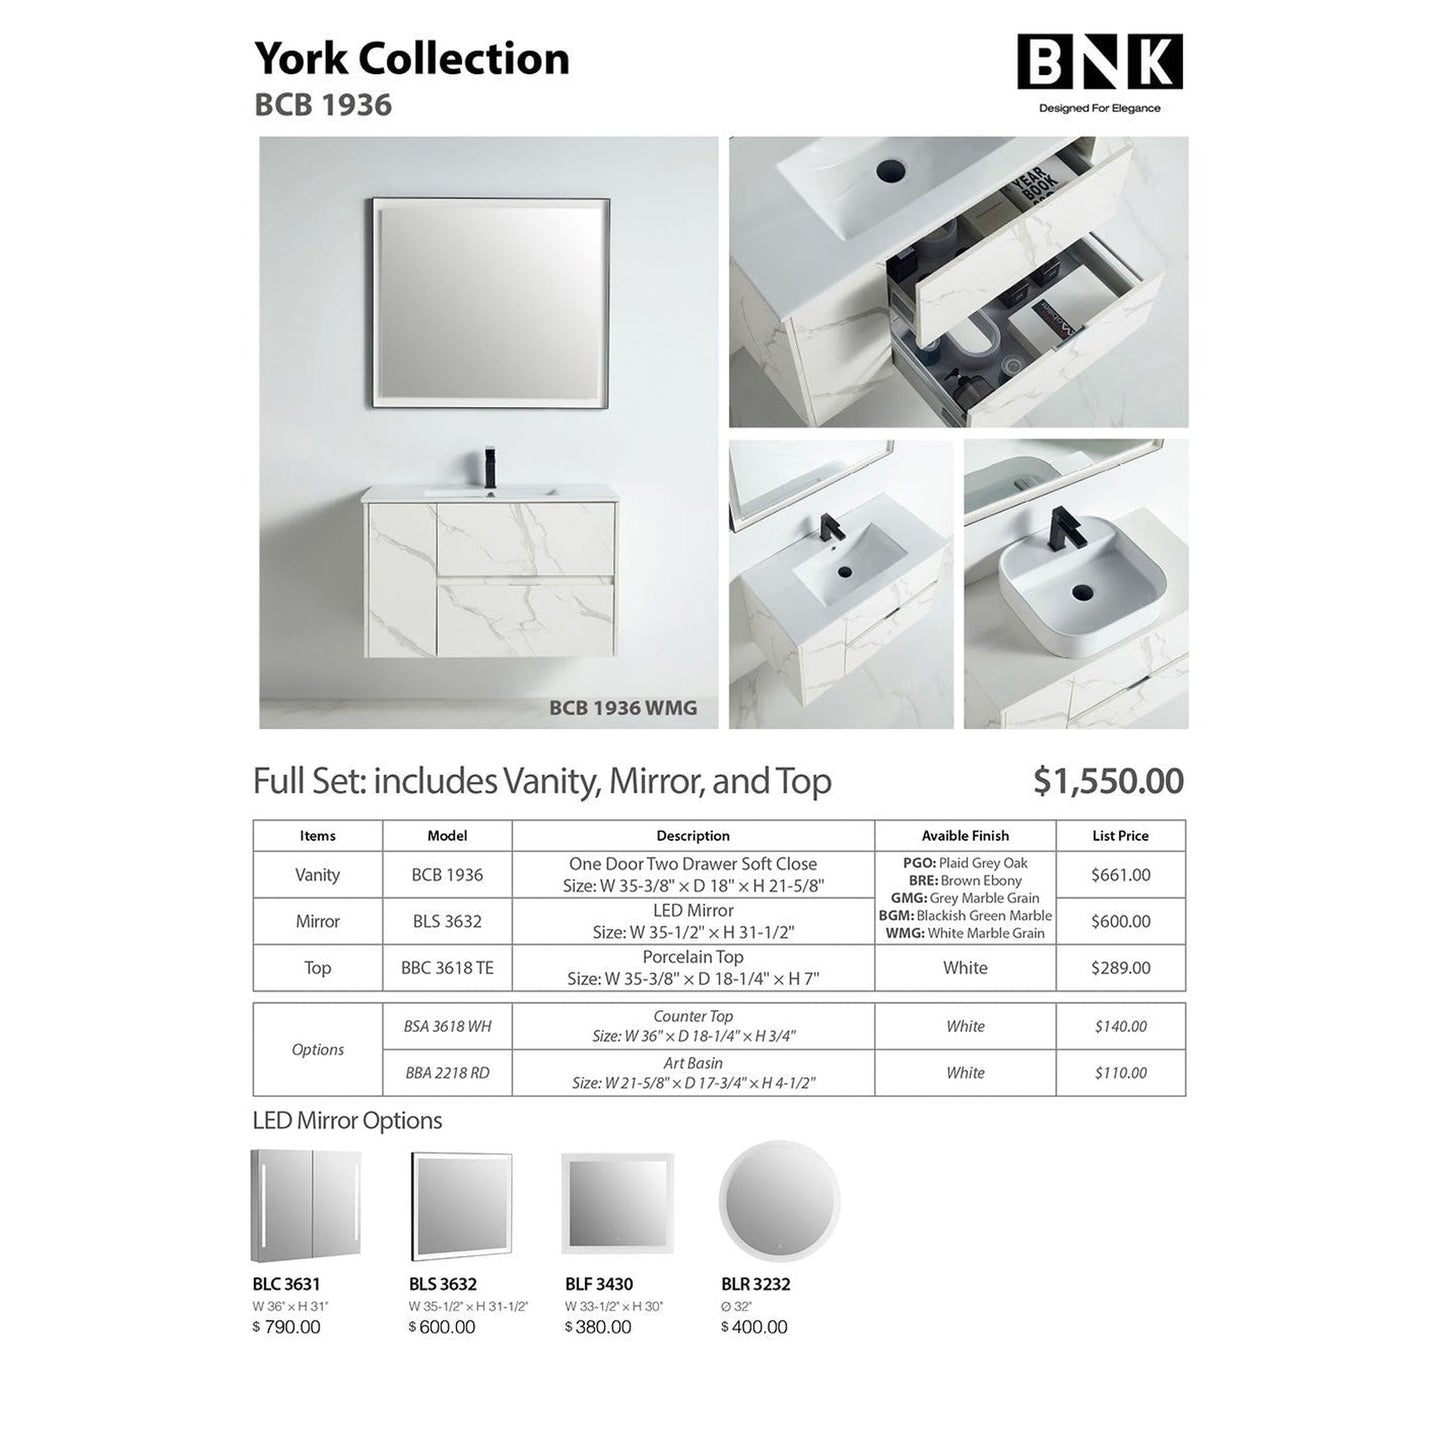 BNK BCB1936WMG York White Mable Grain Vanity Only One-Door Two Drawer Soft Close